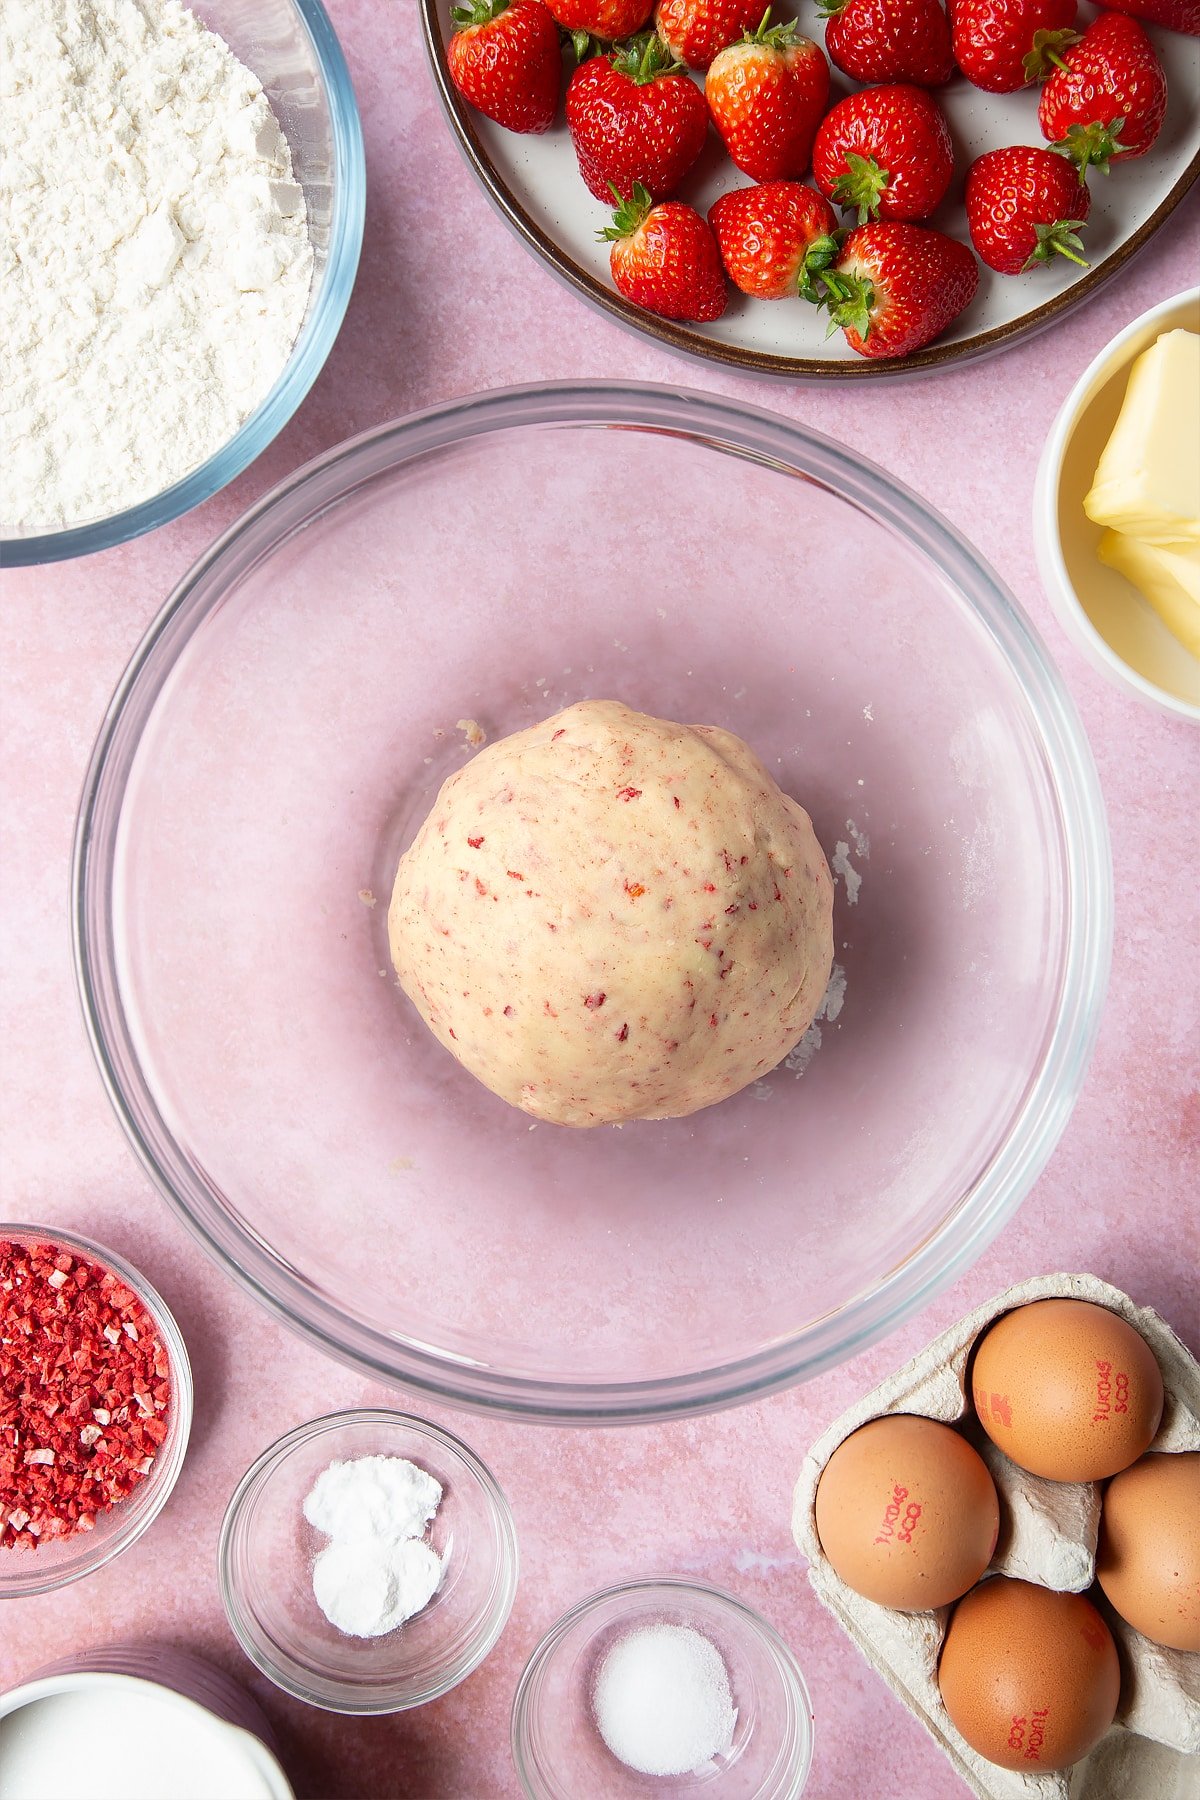 The strawberry biscuit mixture gathered into a ball.